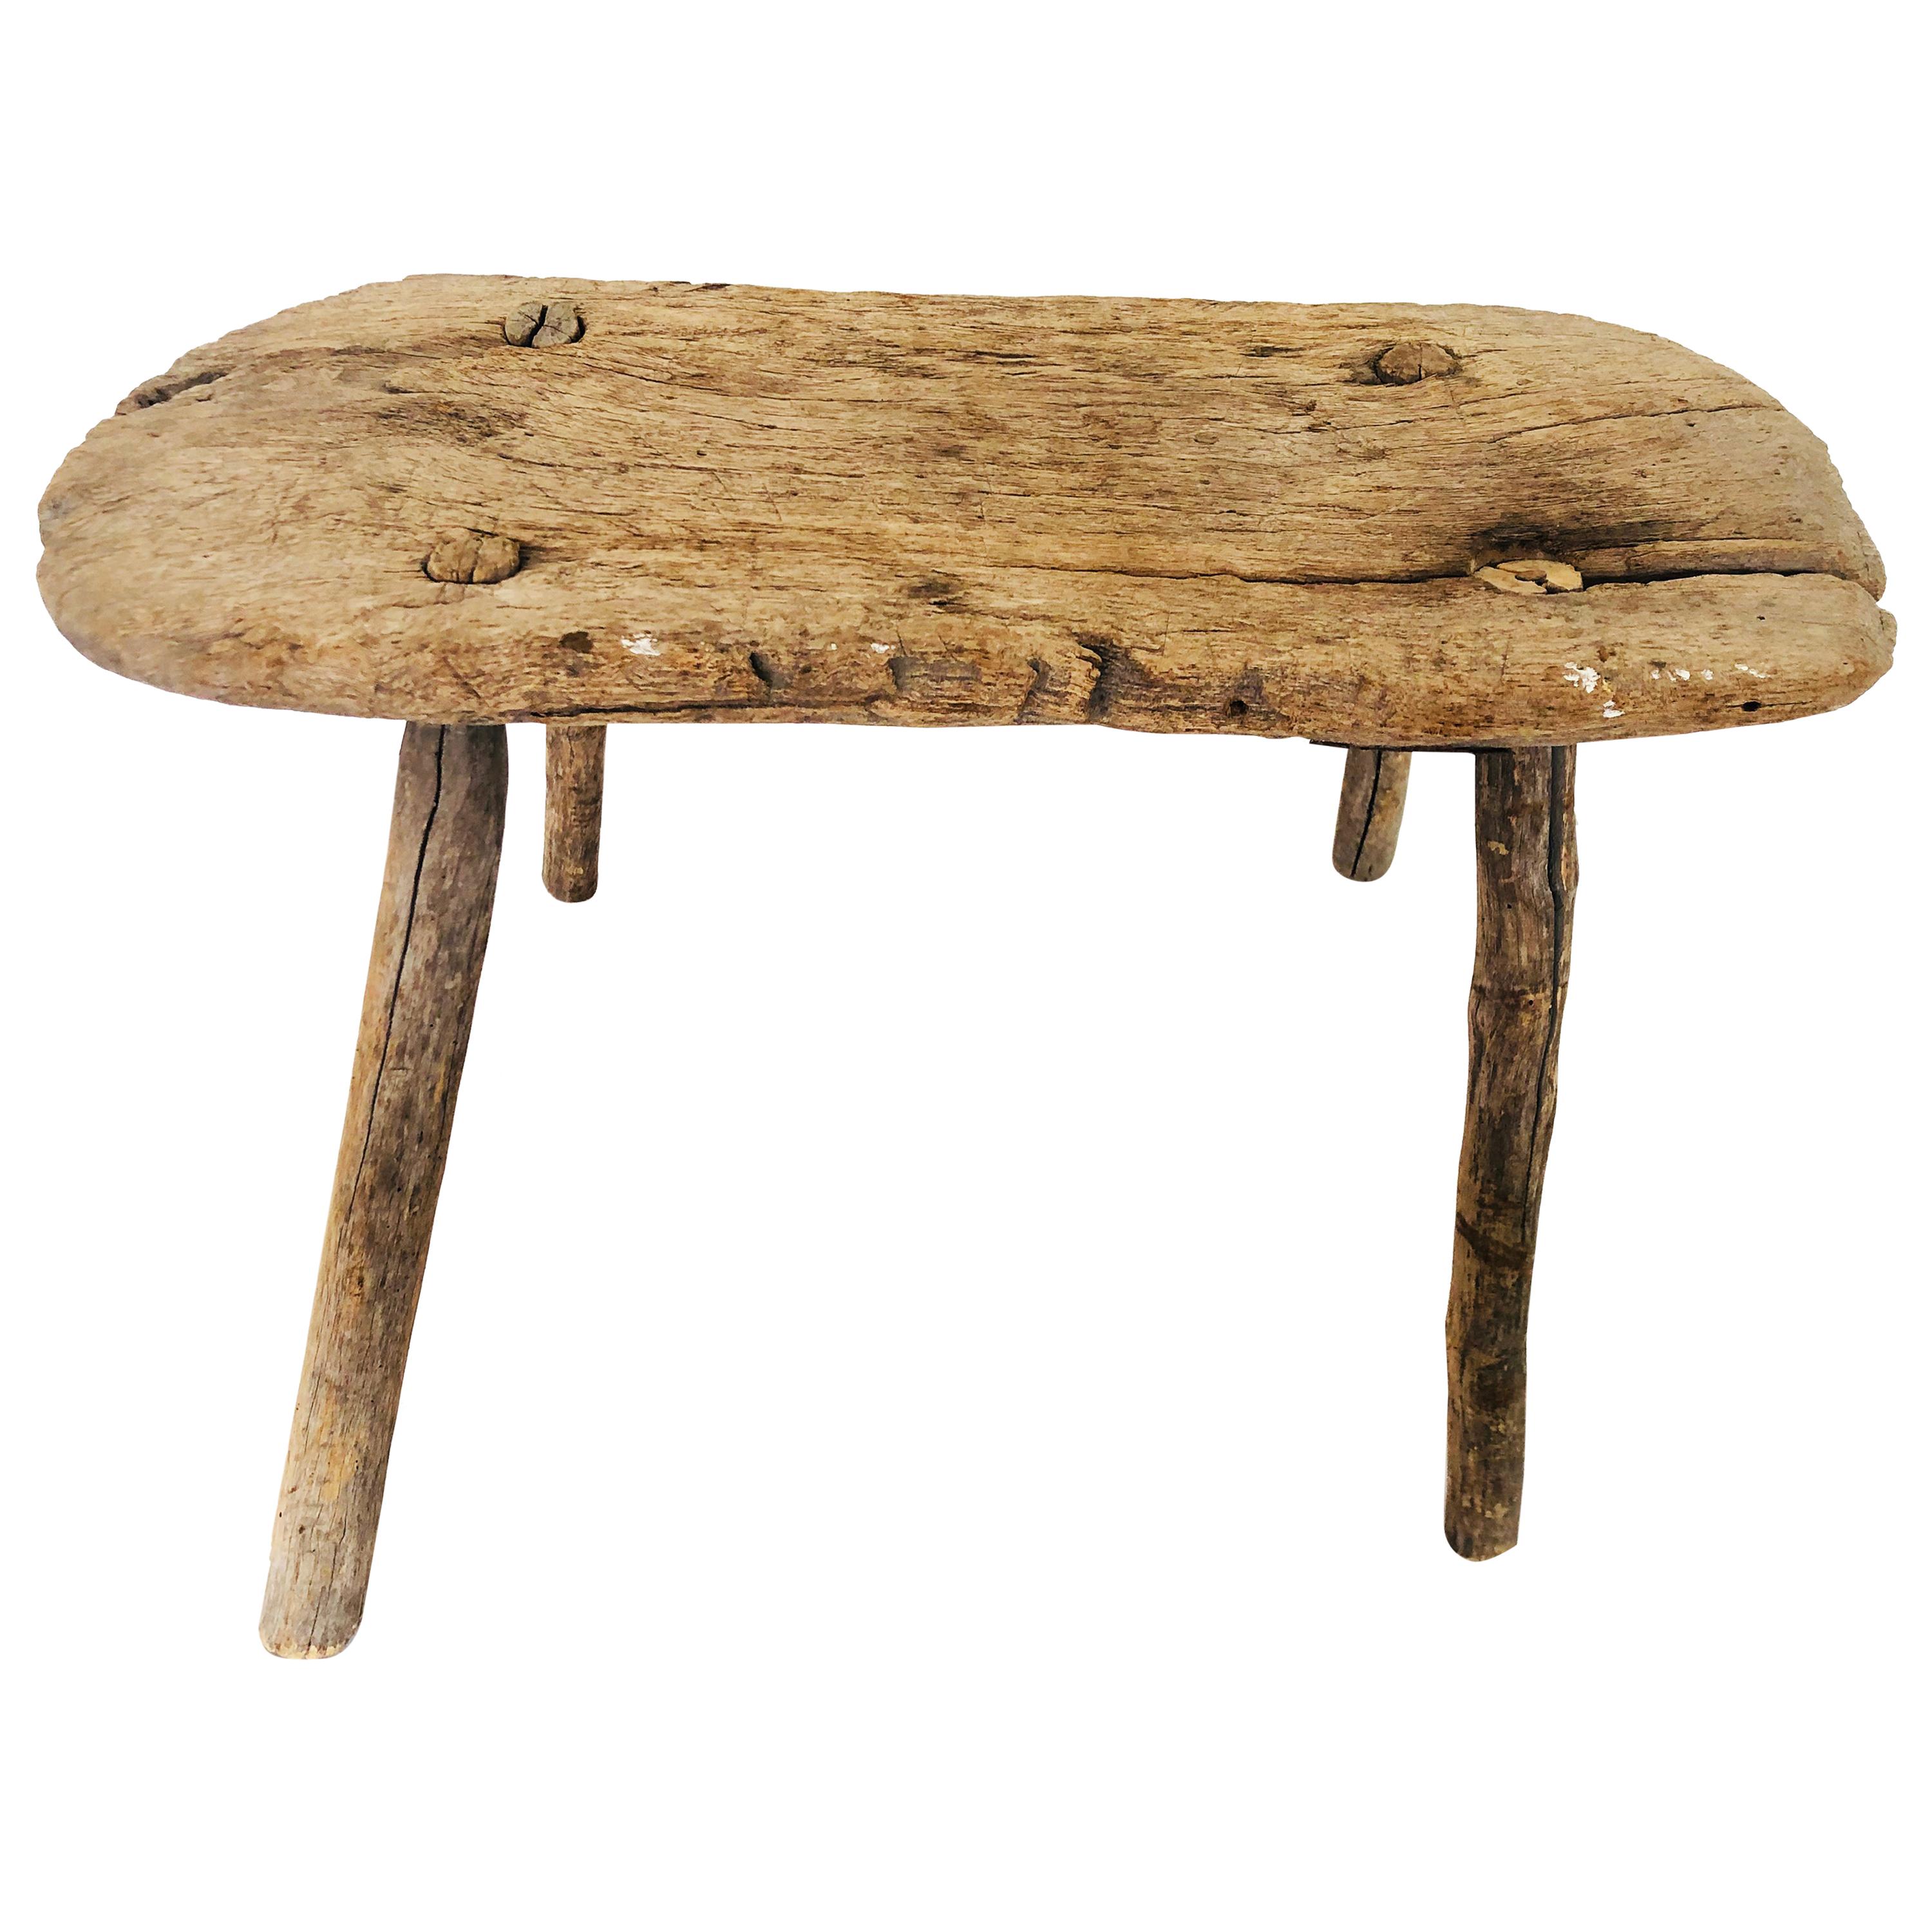 Antique Solid Mezquite Wood Mini Table Found in Wester México For Sale